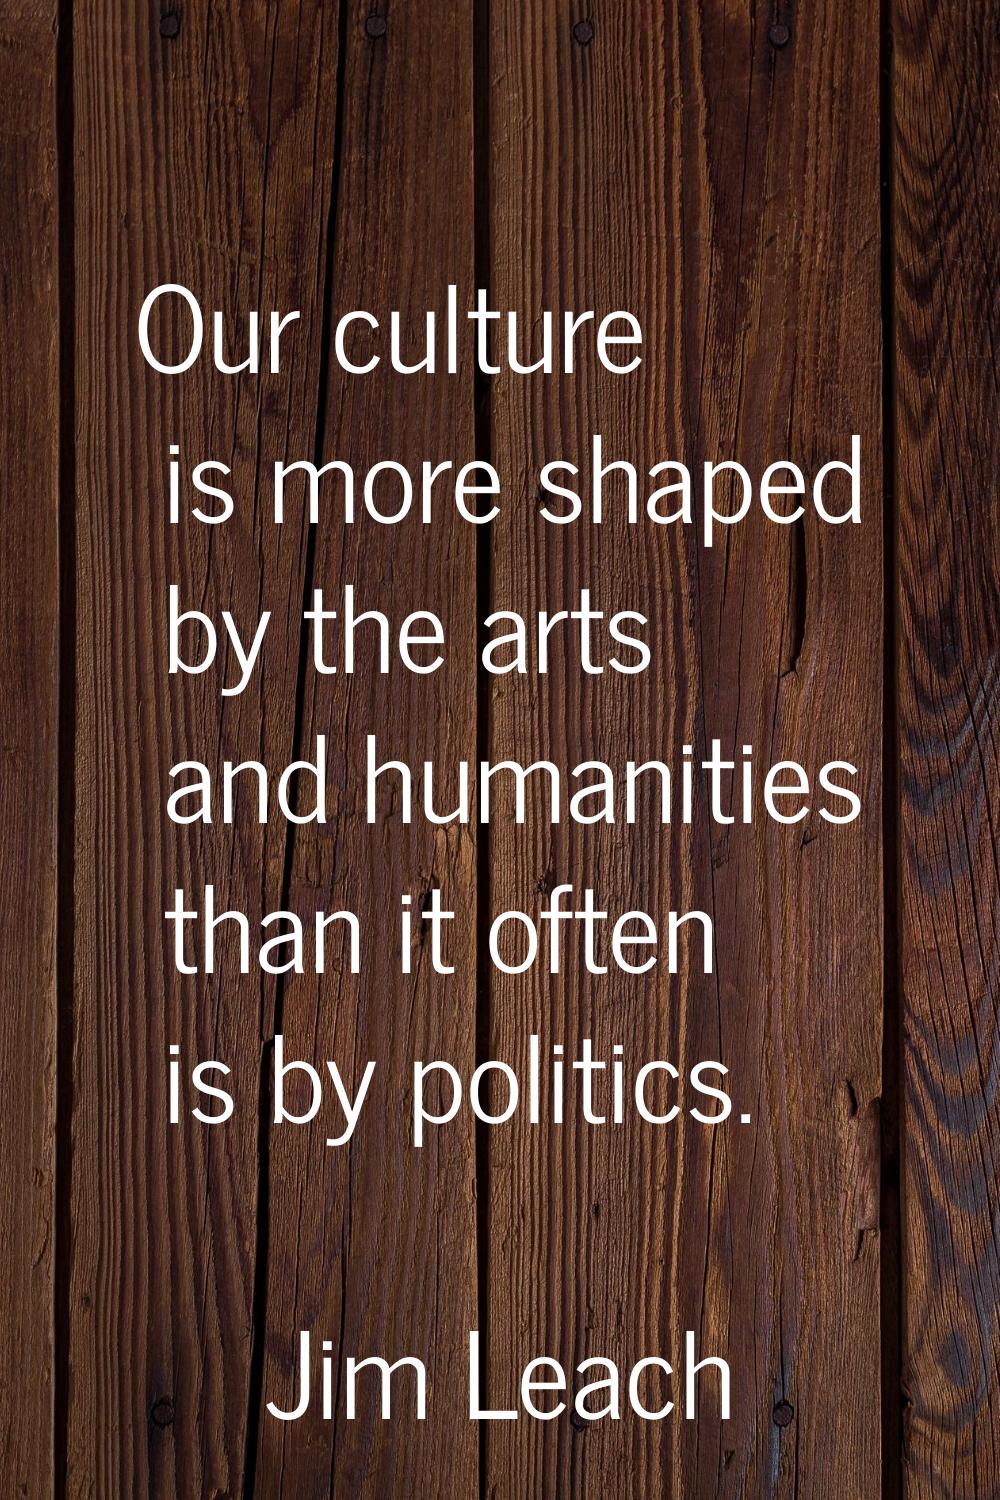 Our culture is more shaped by the arts and humanities than it often is by politics.